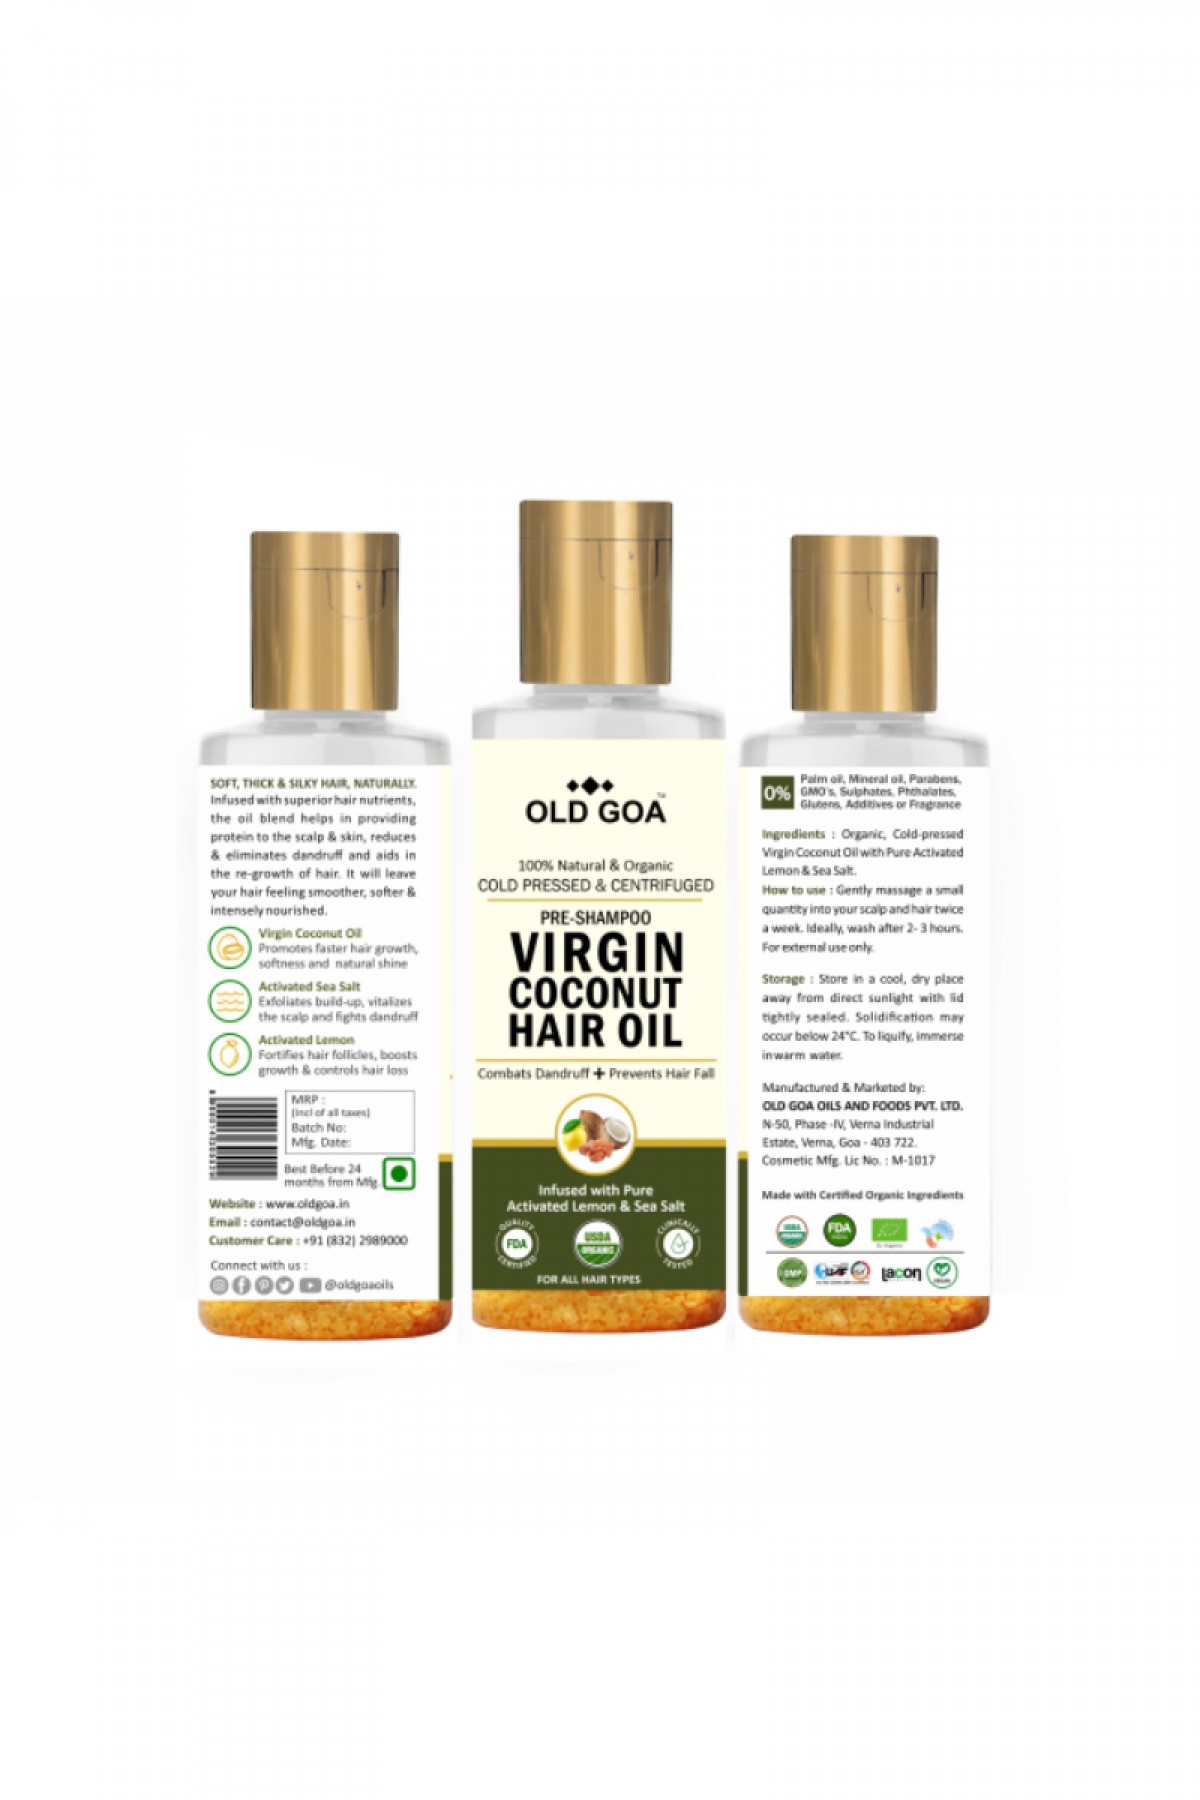 Pre Shampoo Cold pressed Virgin Coconut Oil infused with Pure activated Lemon & Sea Salt Combats Dandruff Prevents Hair Fall - 200 Ml 